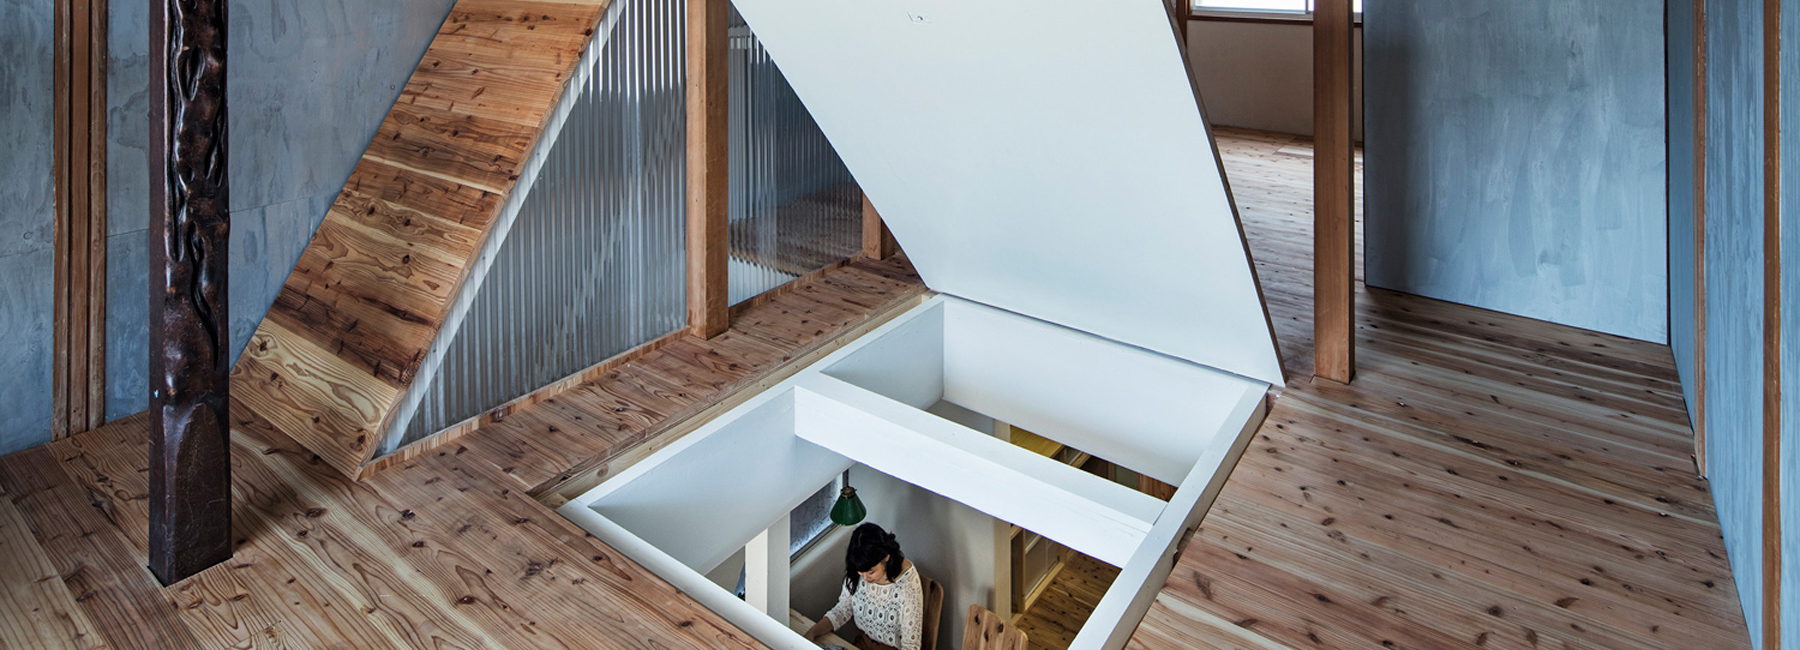 watch the trap door! a japanese architect's solution to an age old problem